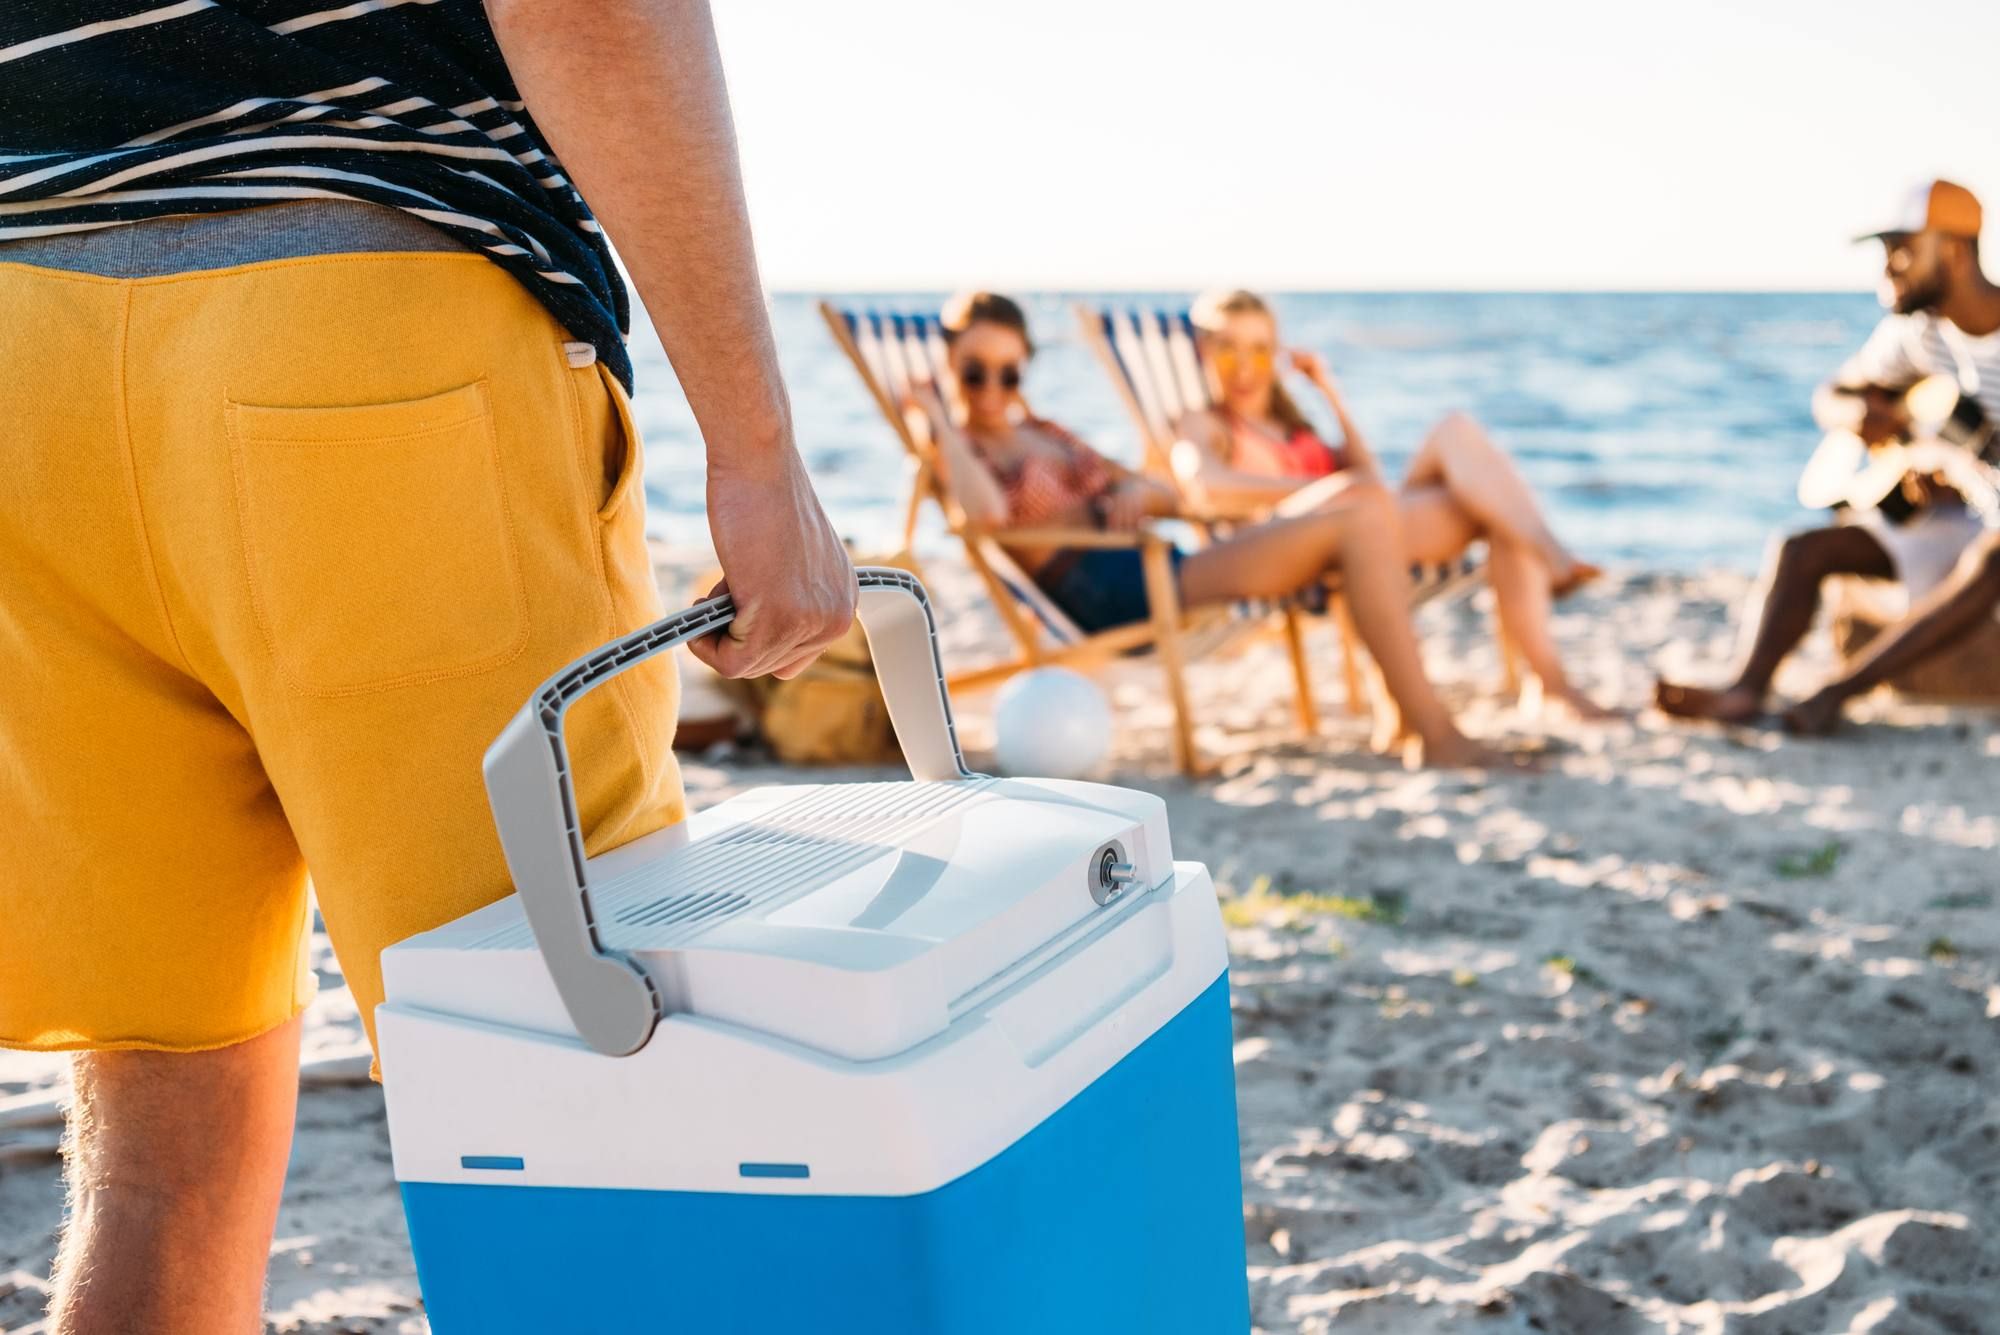 Rubbermaid Coolers Leave Consumers Lukewarm, New Class Action Lawsuit  Claims - Top Class Actions